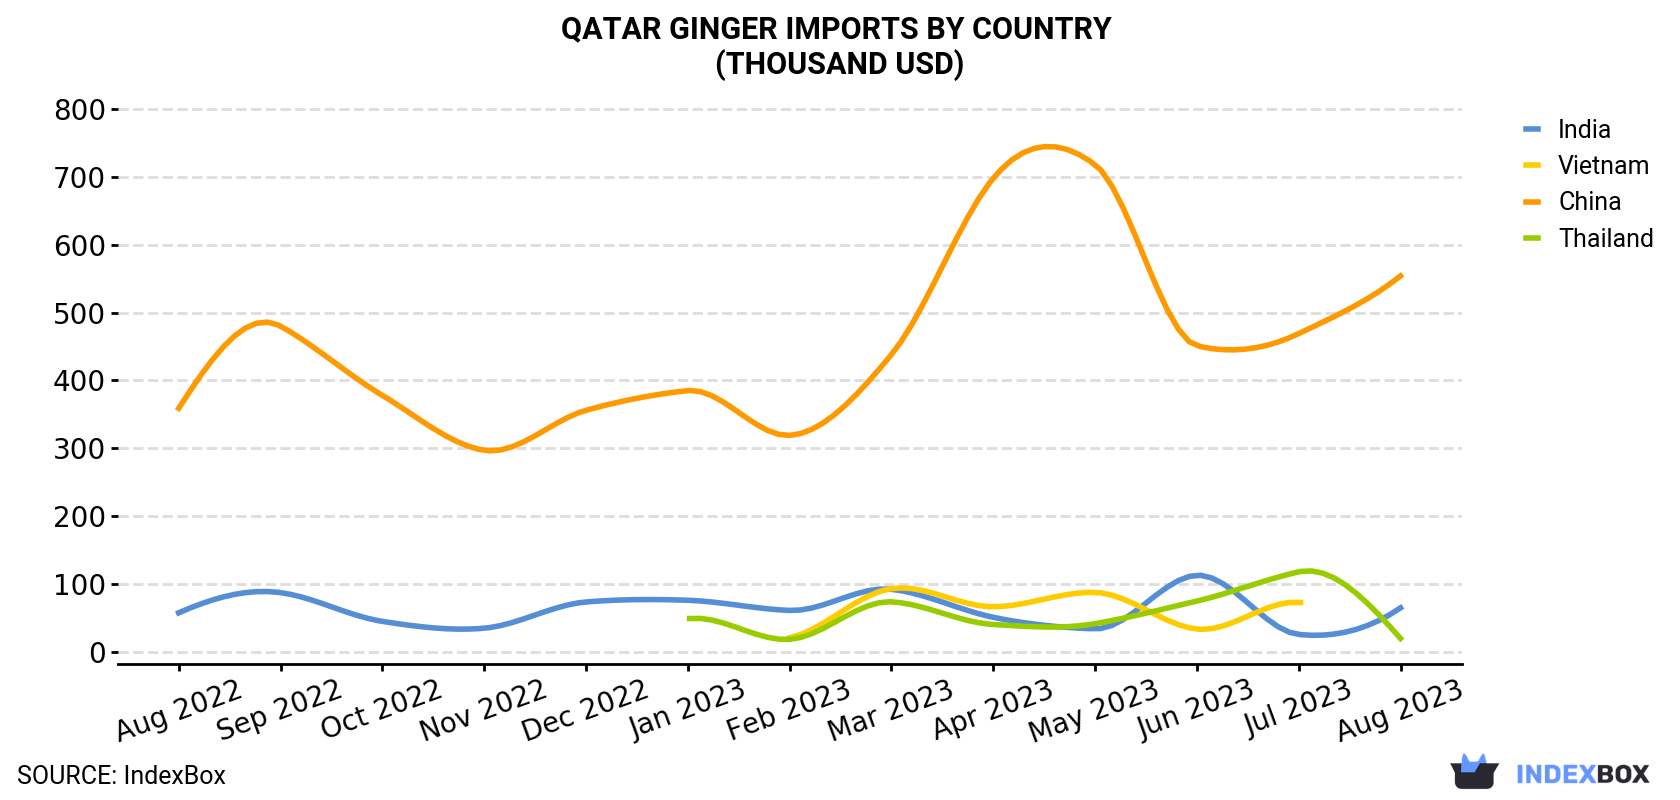 Qatar Ginger Imports By Country (Thousand USD)